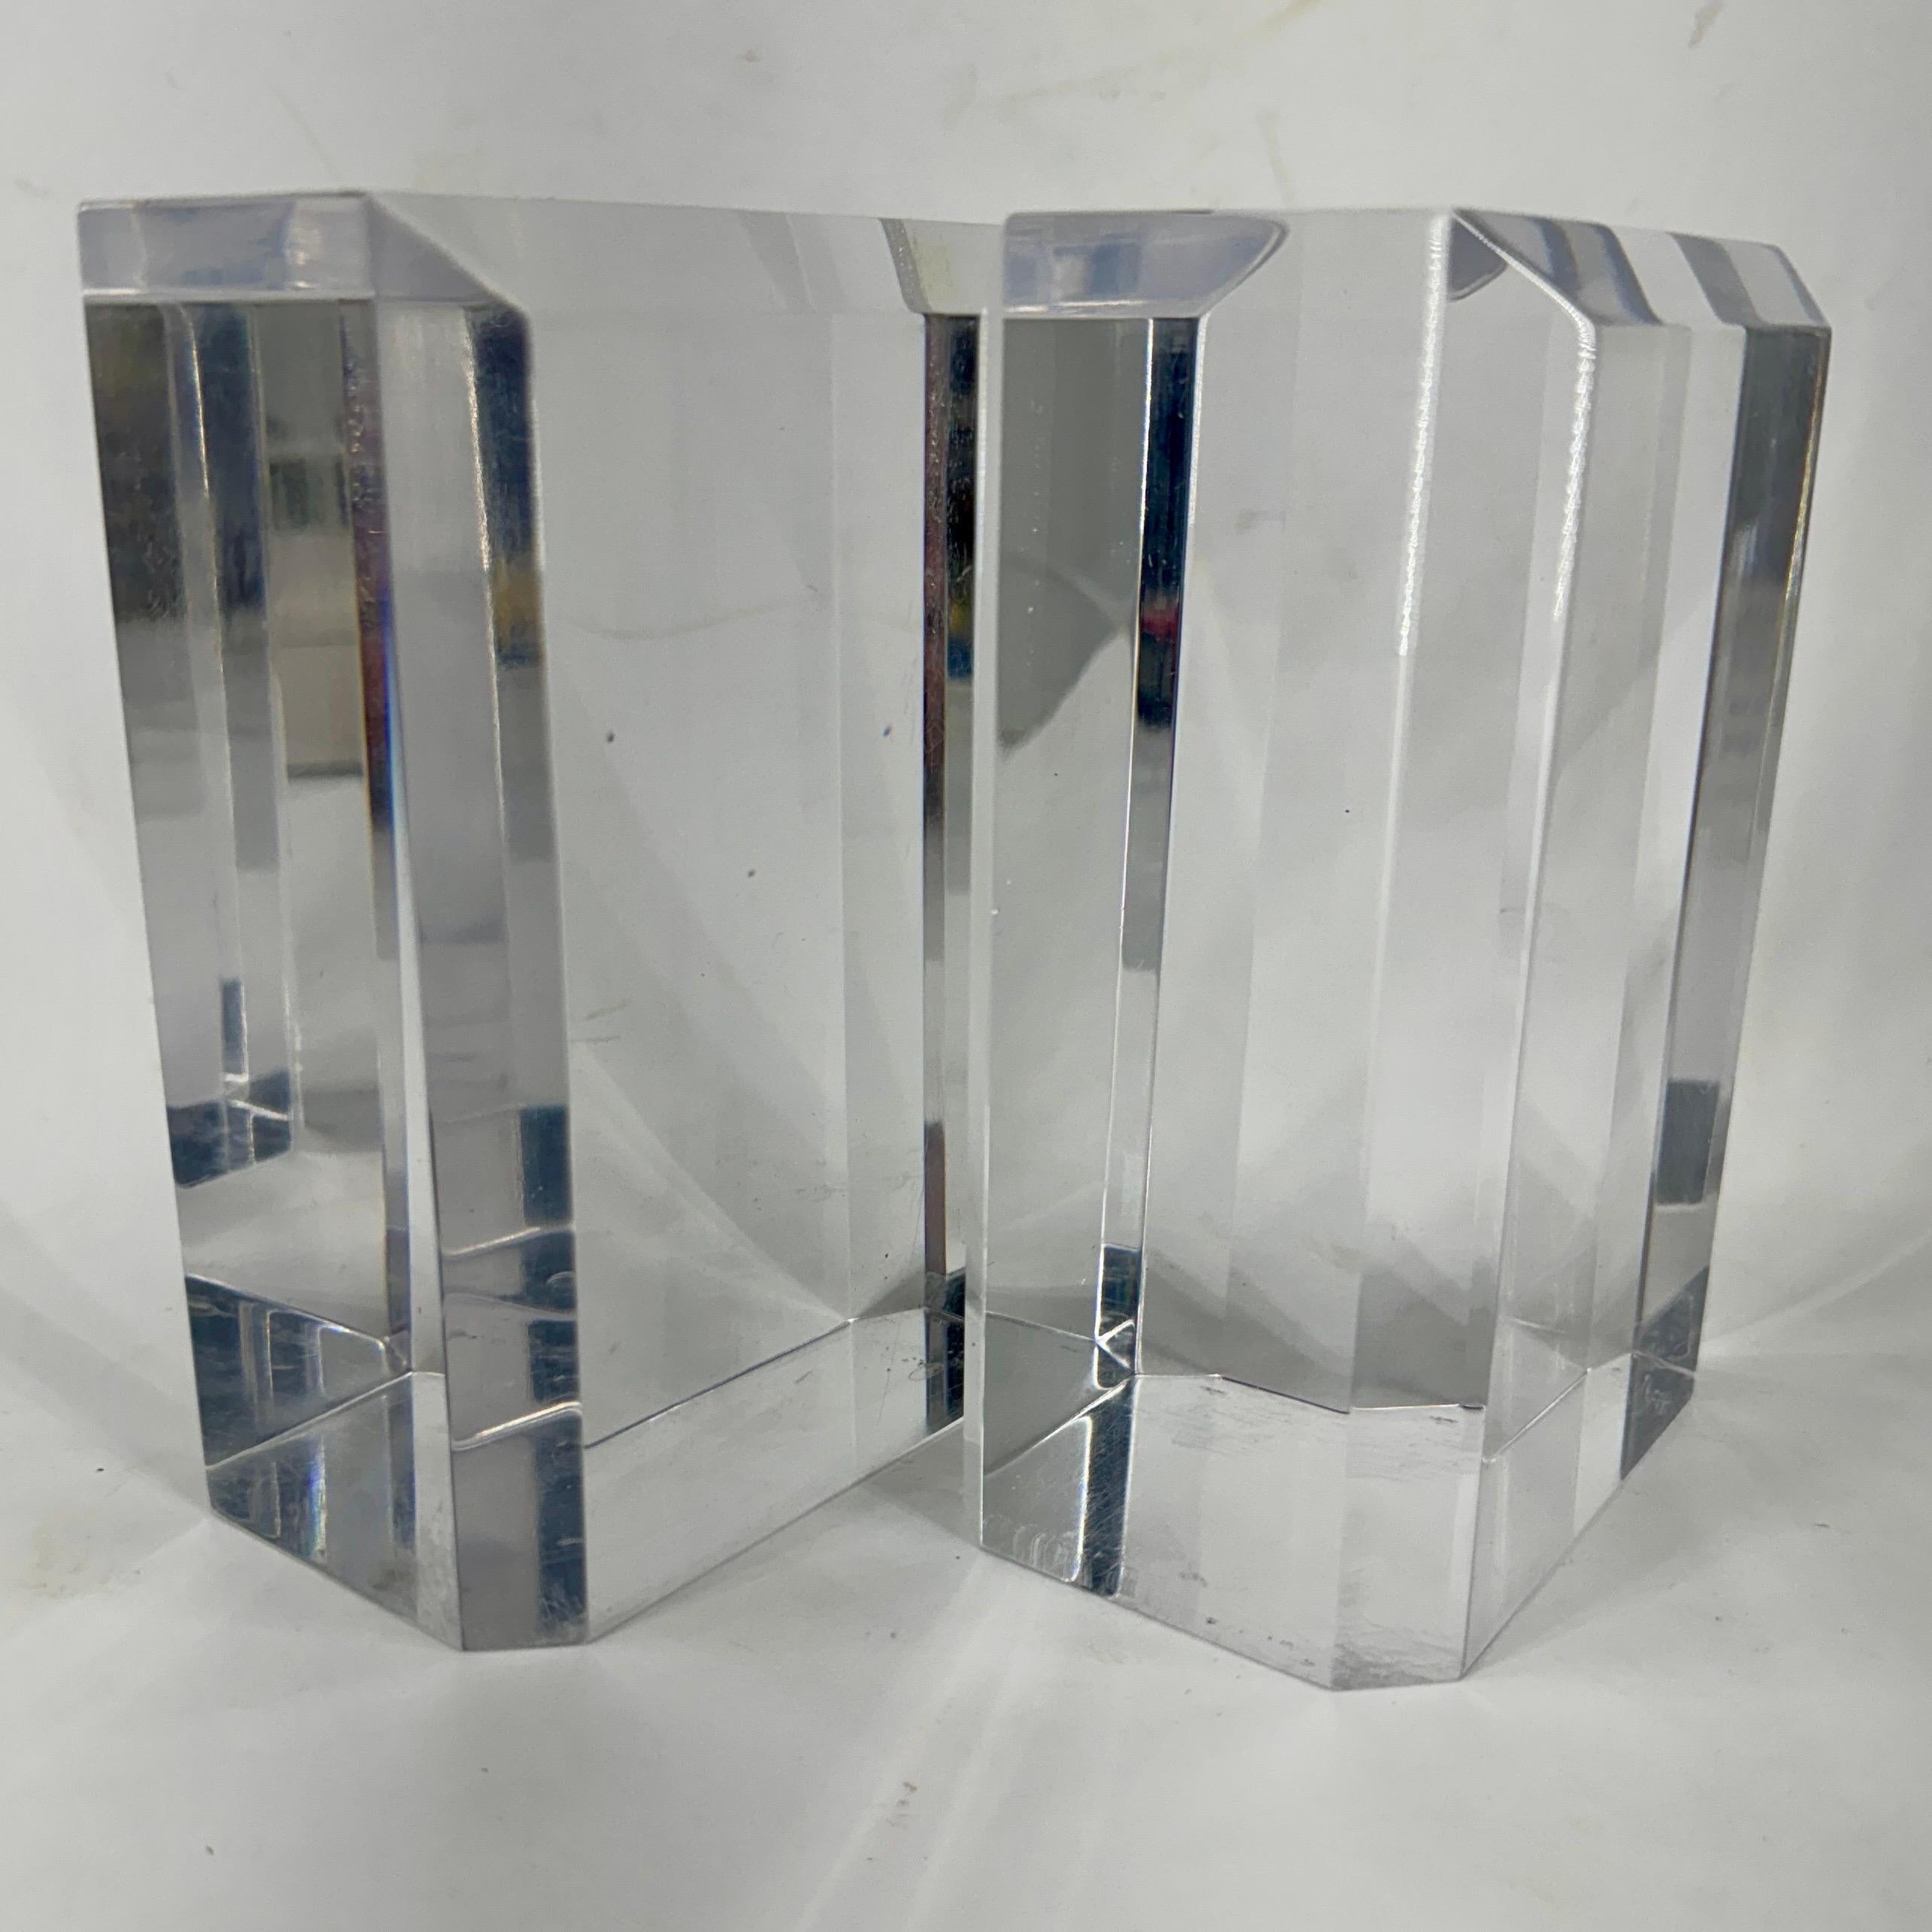 American Pair of Mid-Century Modern Beveled Lucite Bookends